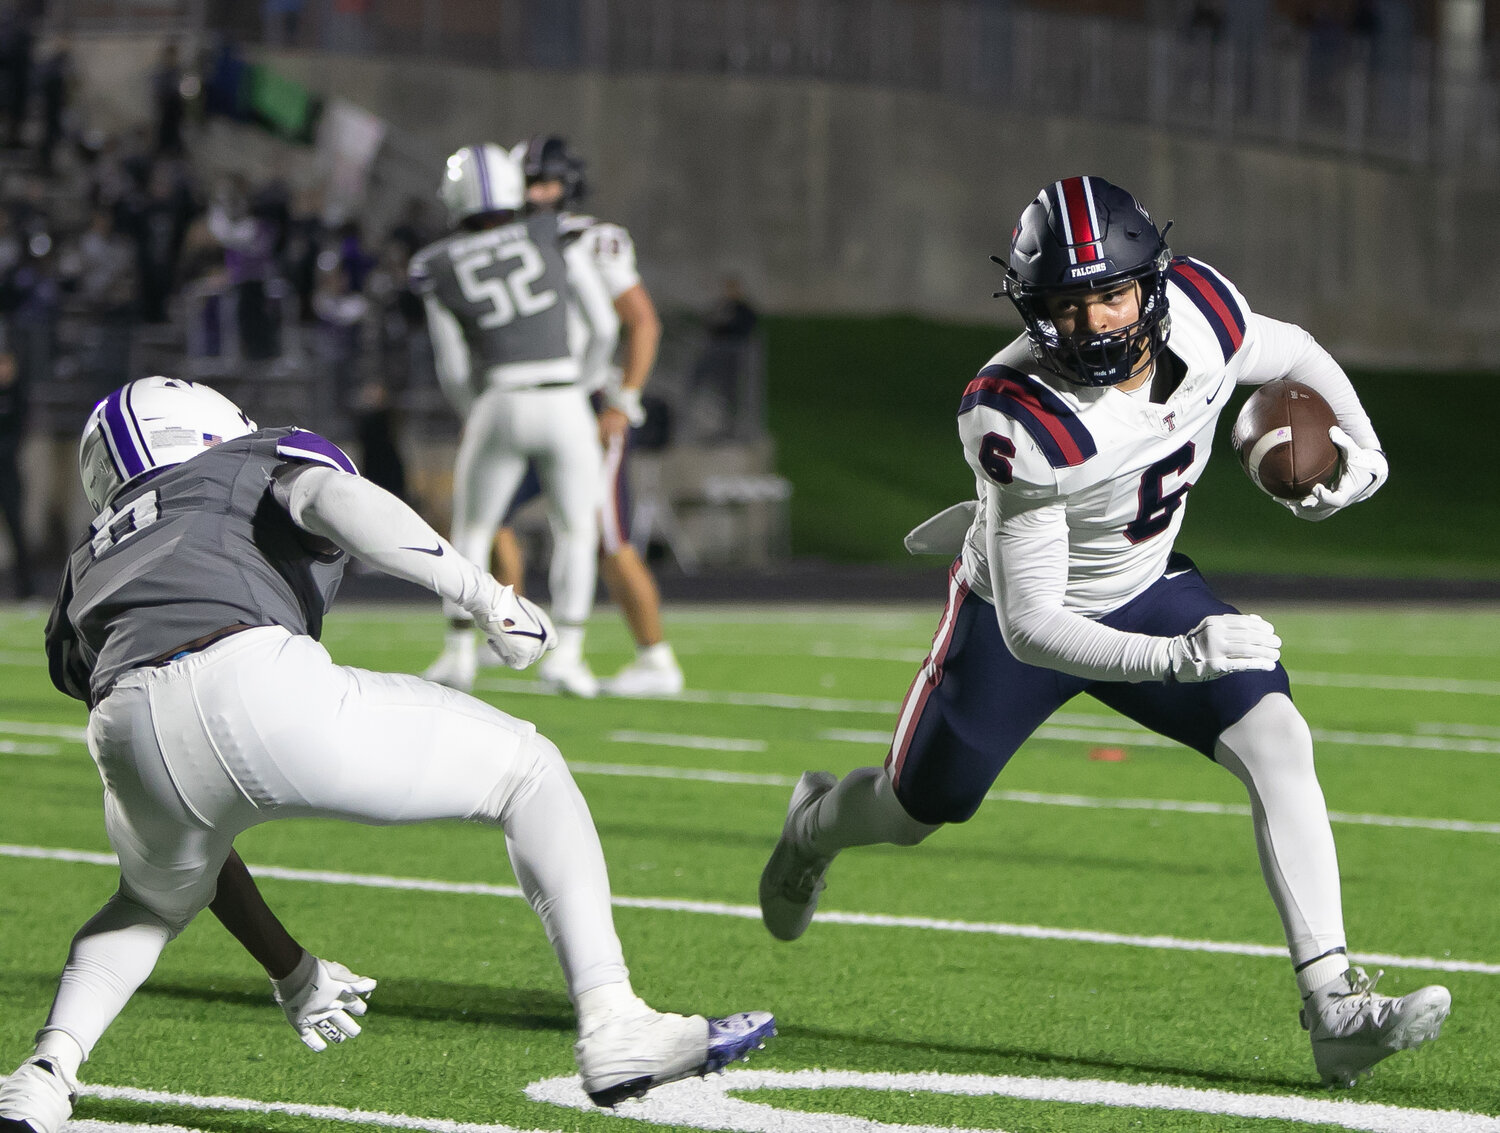 Dylan Rodriguez tries to get past a defender during Friday's game between Tompkins and Ridge Point at Hall Stadium.